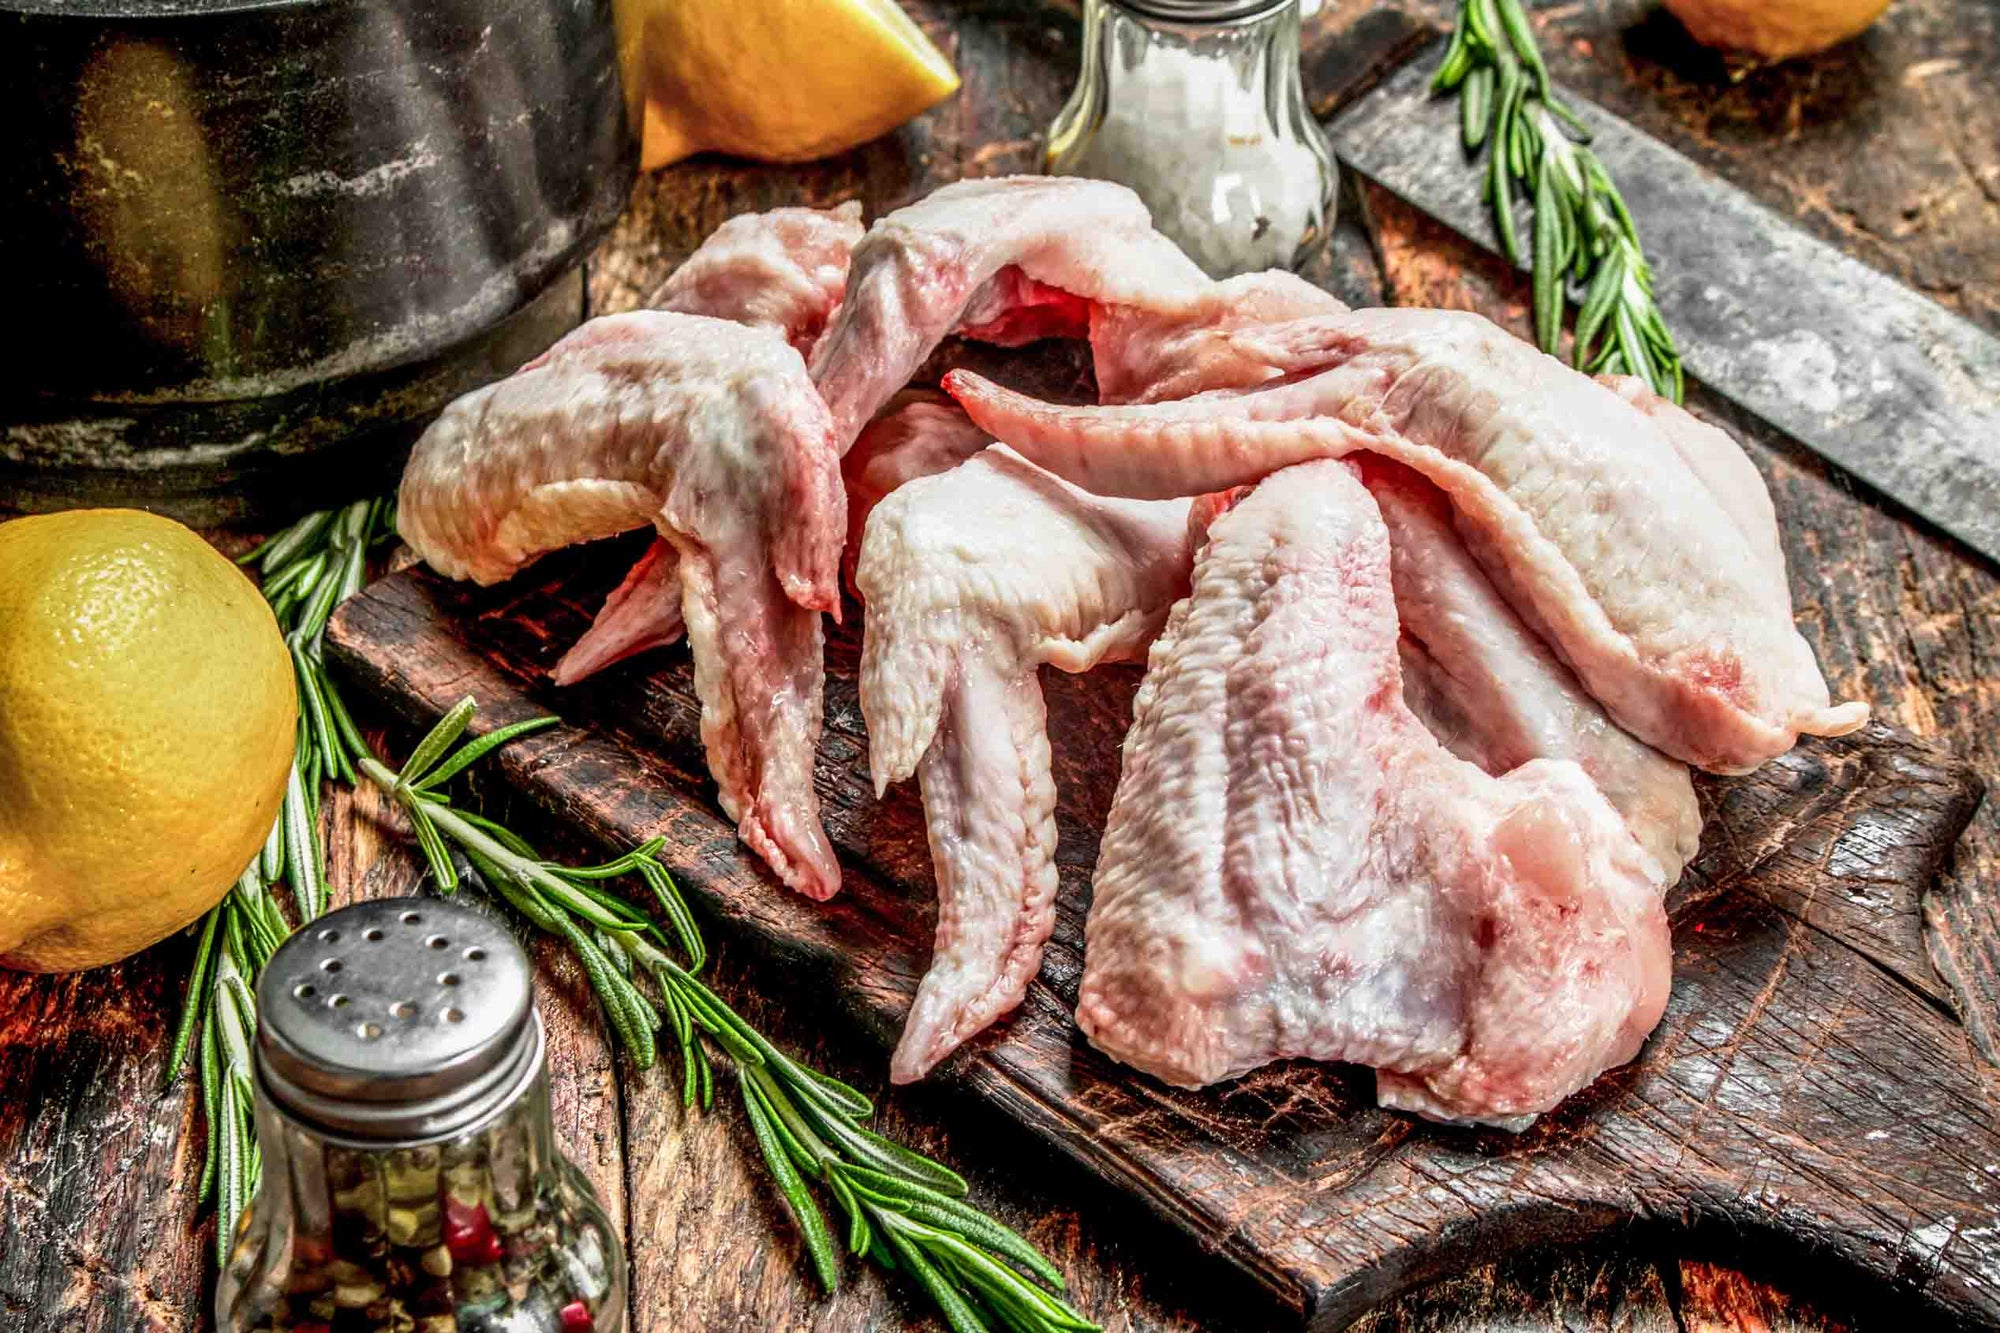 pasture raised soy-free corn-free turkey legs drumsticks and wings as nature intended Northstar Bison organically raised sunshine celiac gluten free crones disease gut health healing non-gmo